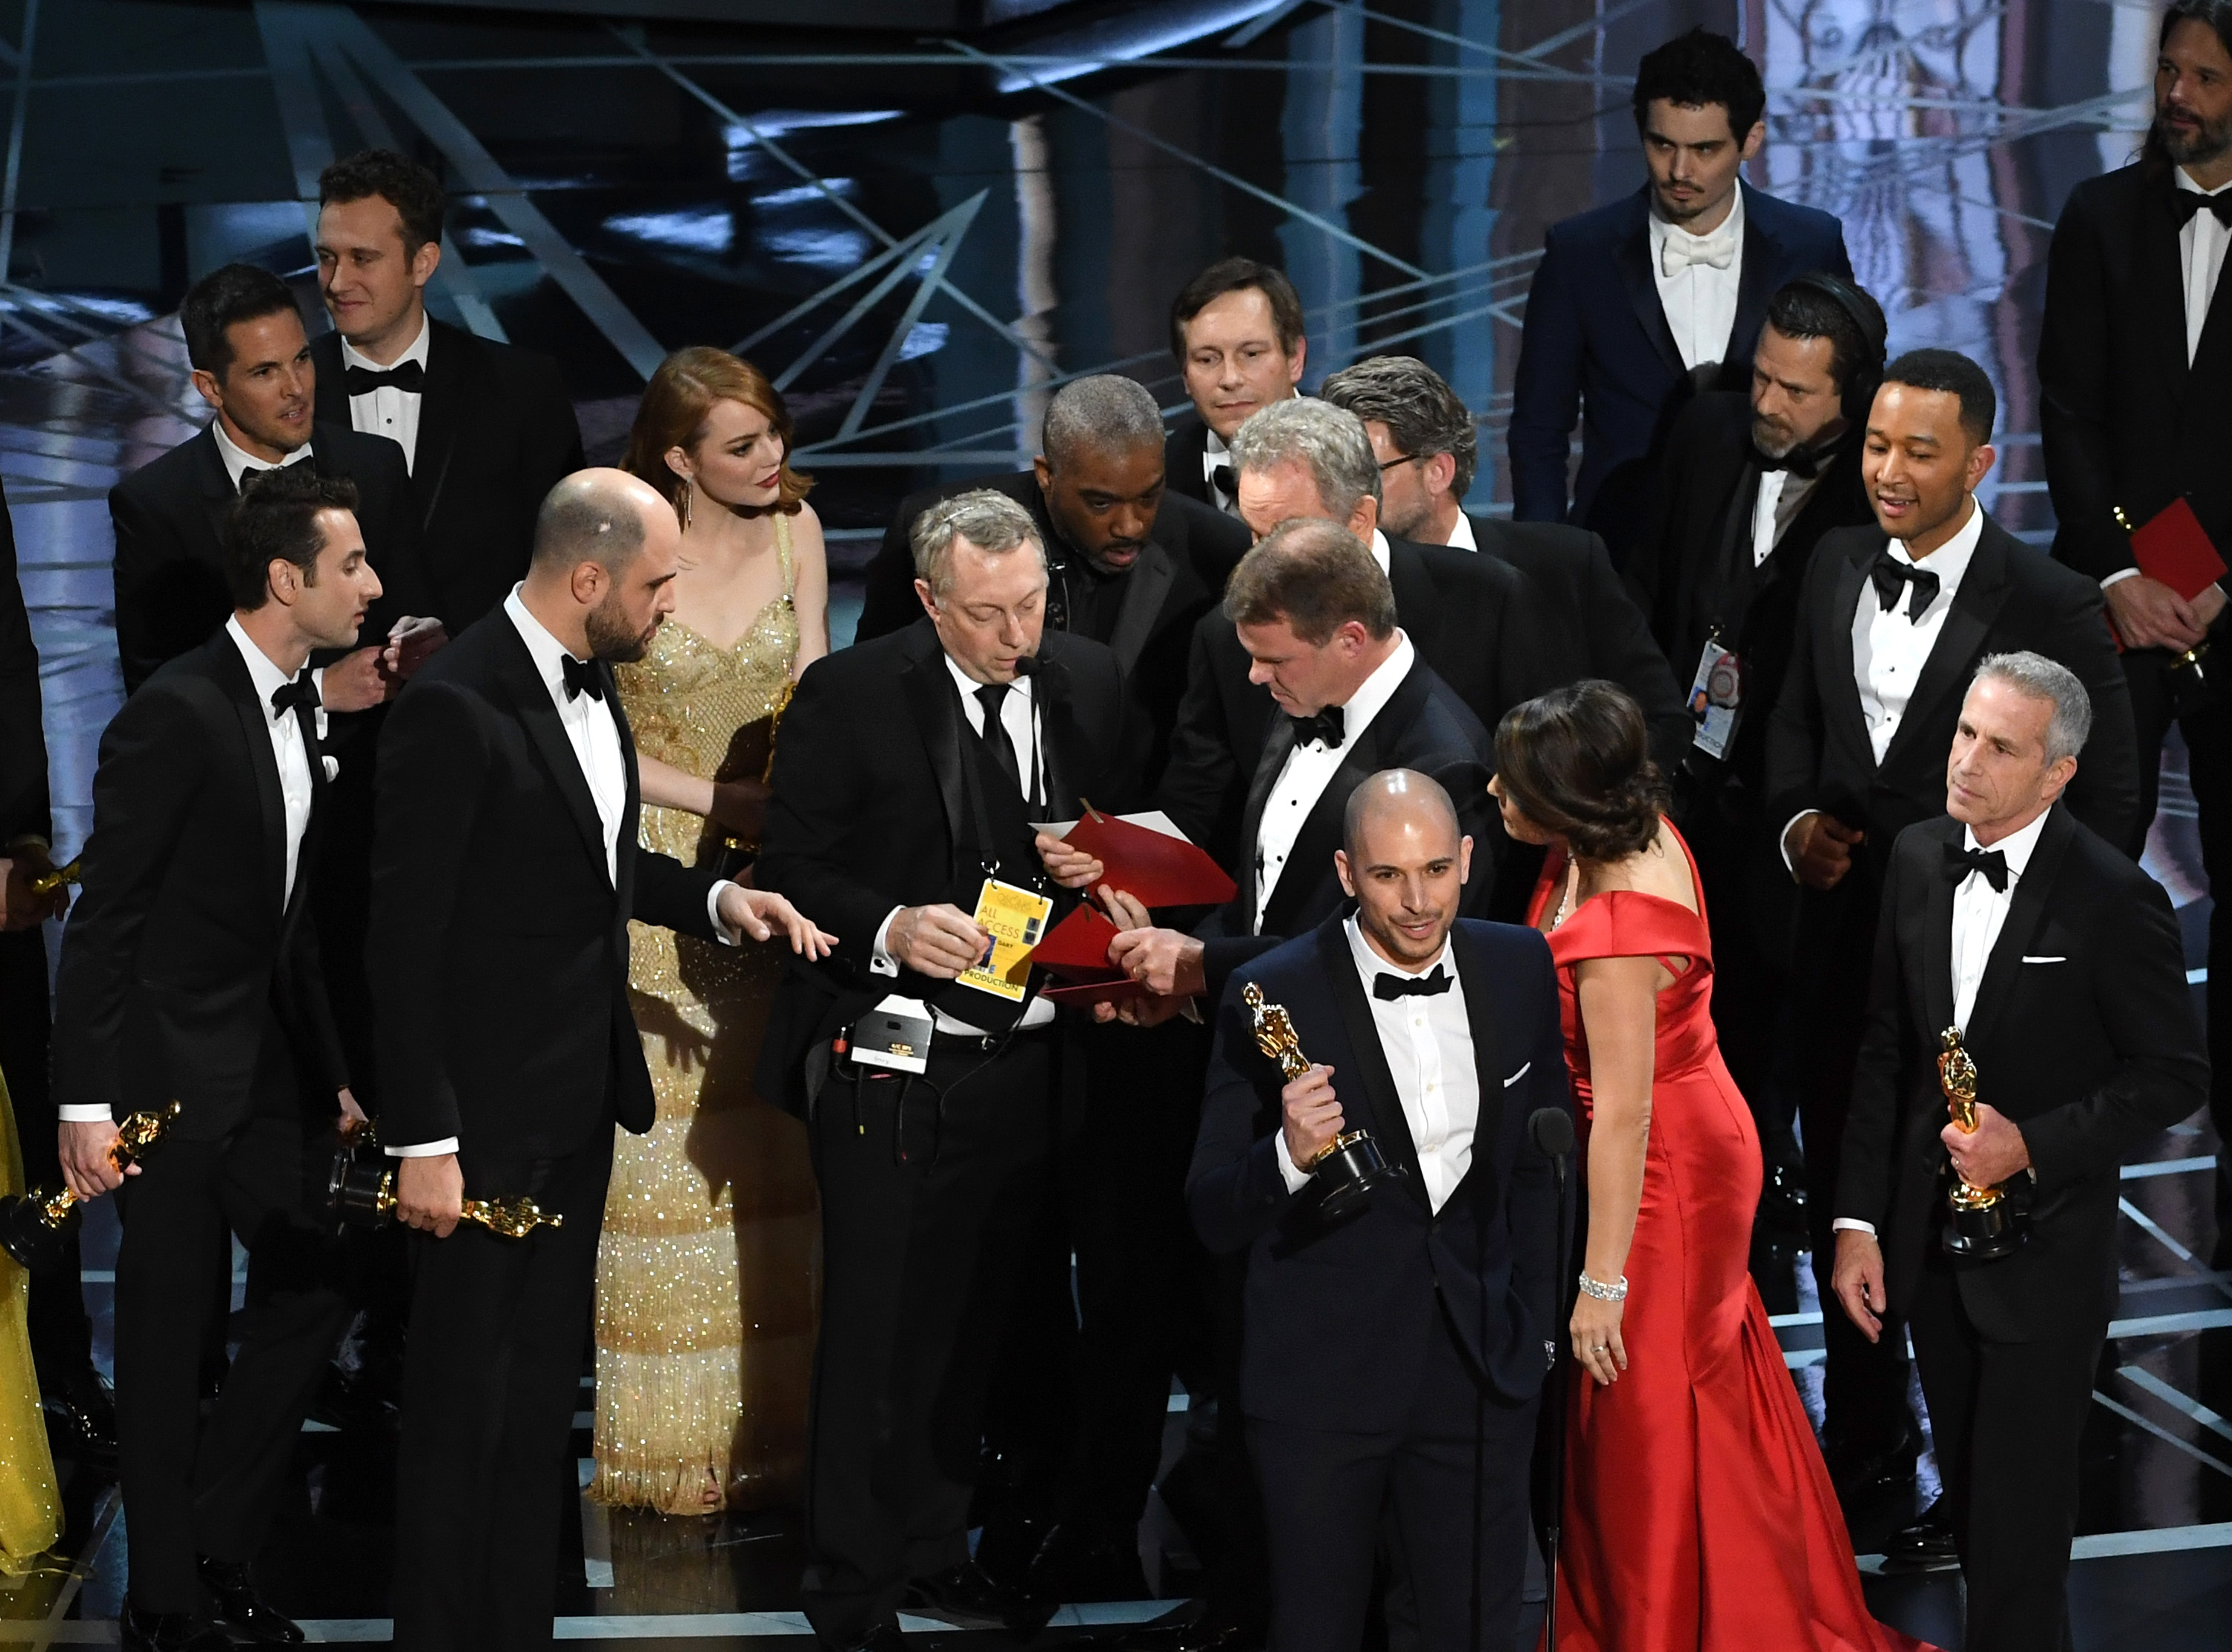 HOLLYWOOD, CA - FEBRUARY 26: 'La La Land' producer Fred Berger (R) speaks at the microphone as production staff consult behind him regarding a presentation error of the Best Picture award (later awarded to 'Moonlight') onstage during the 89th Annual Academy Awards at Hollywood & Highland Center on February 26, 2017 in Hollywood, California. Kevin Winter/Getty Images/AFP